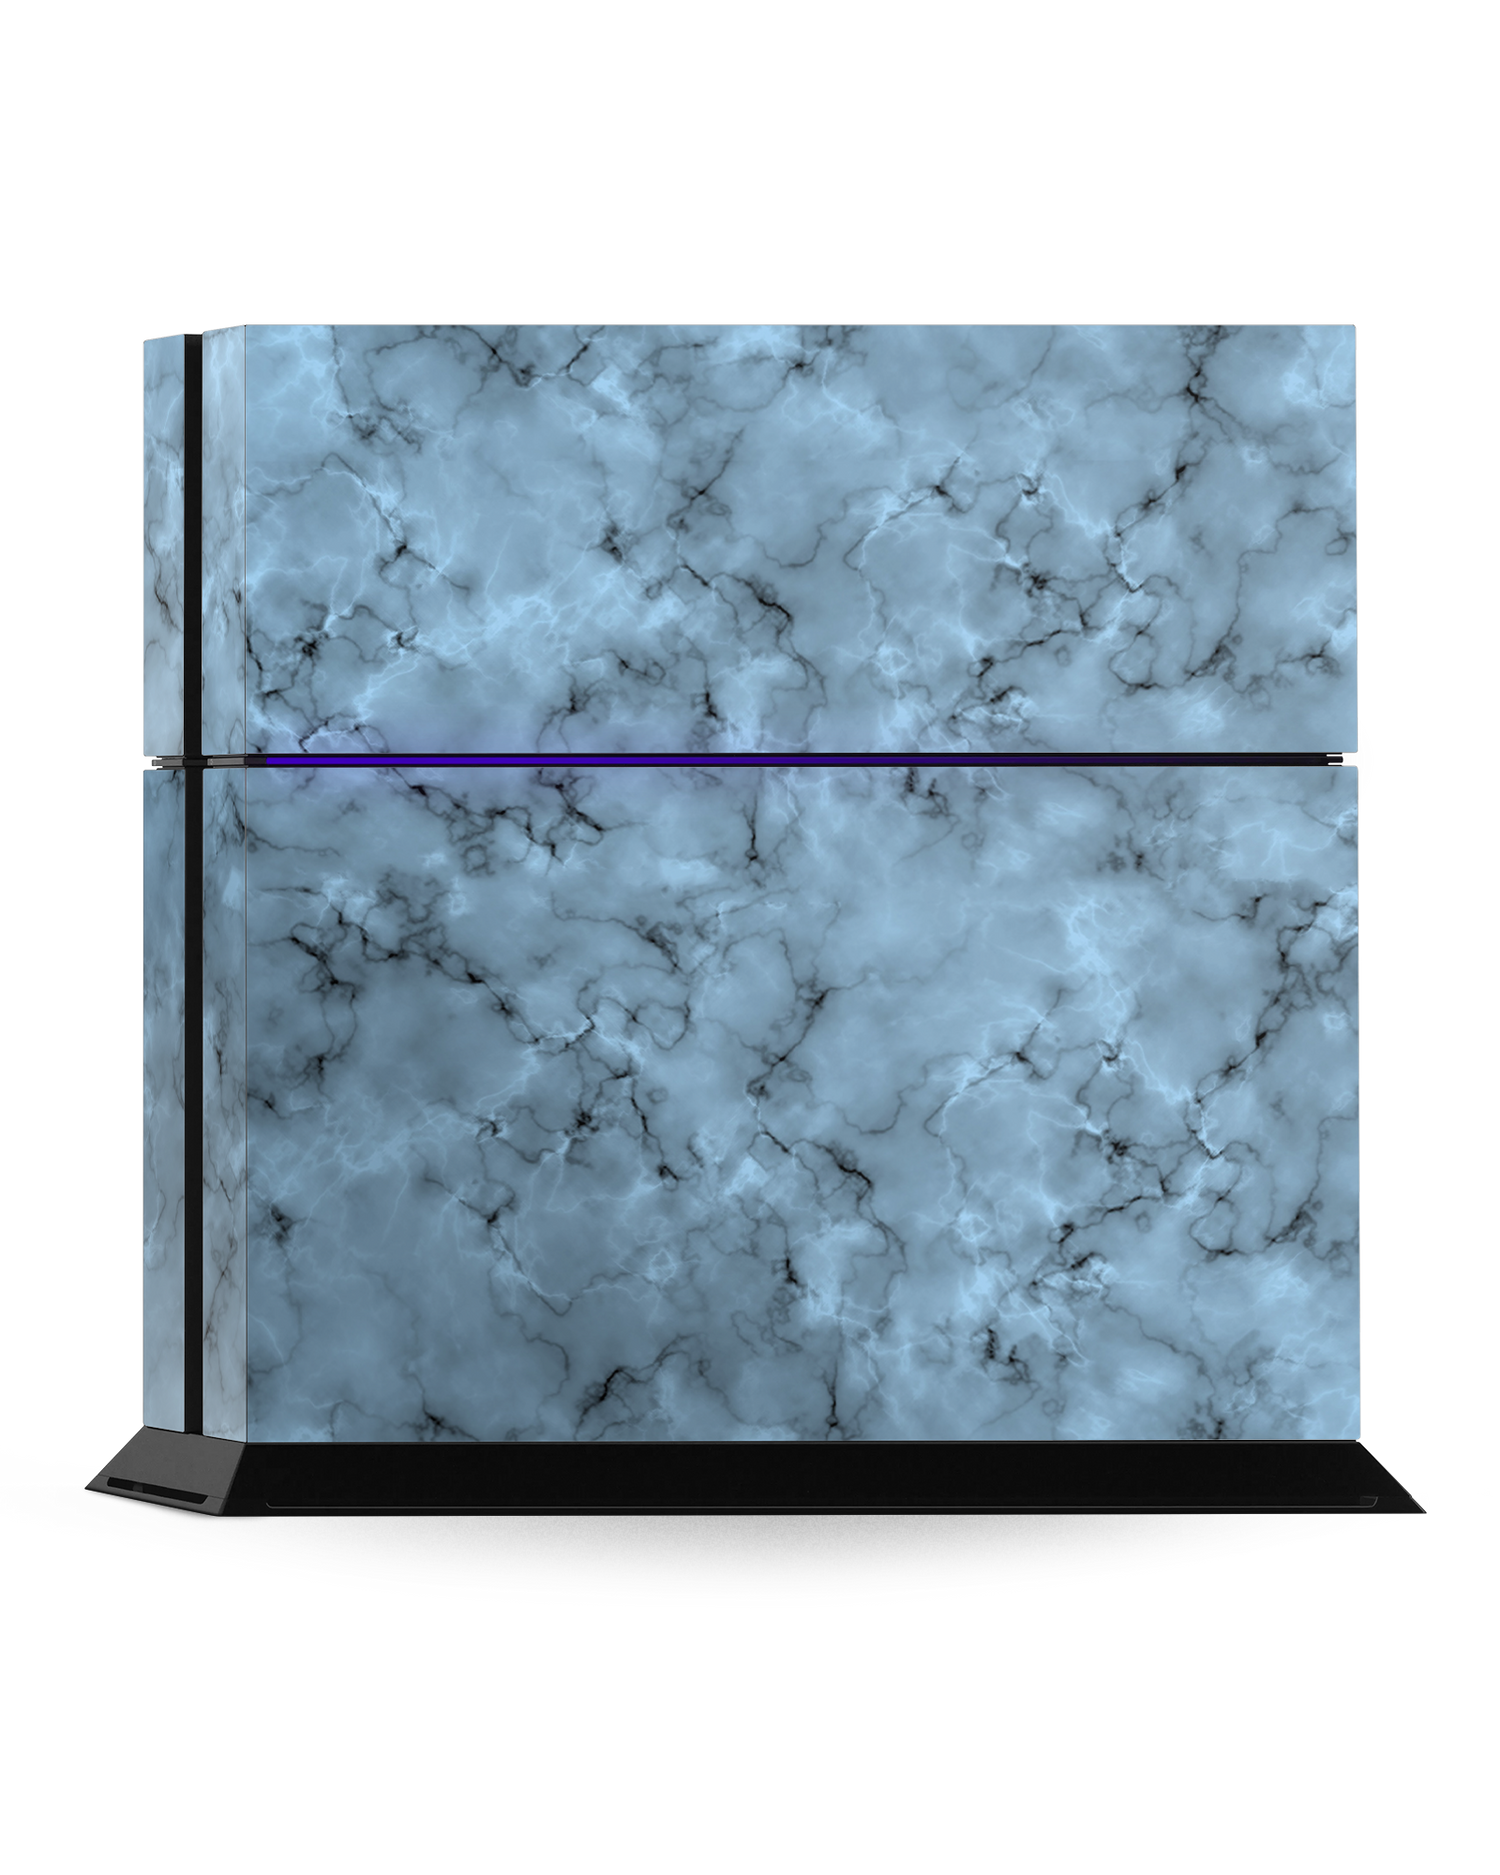 Blue Marble Console Skin for Sony PlayStation 4: Standing